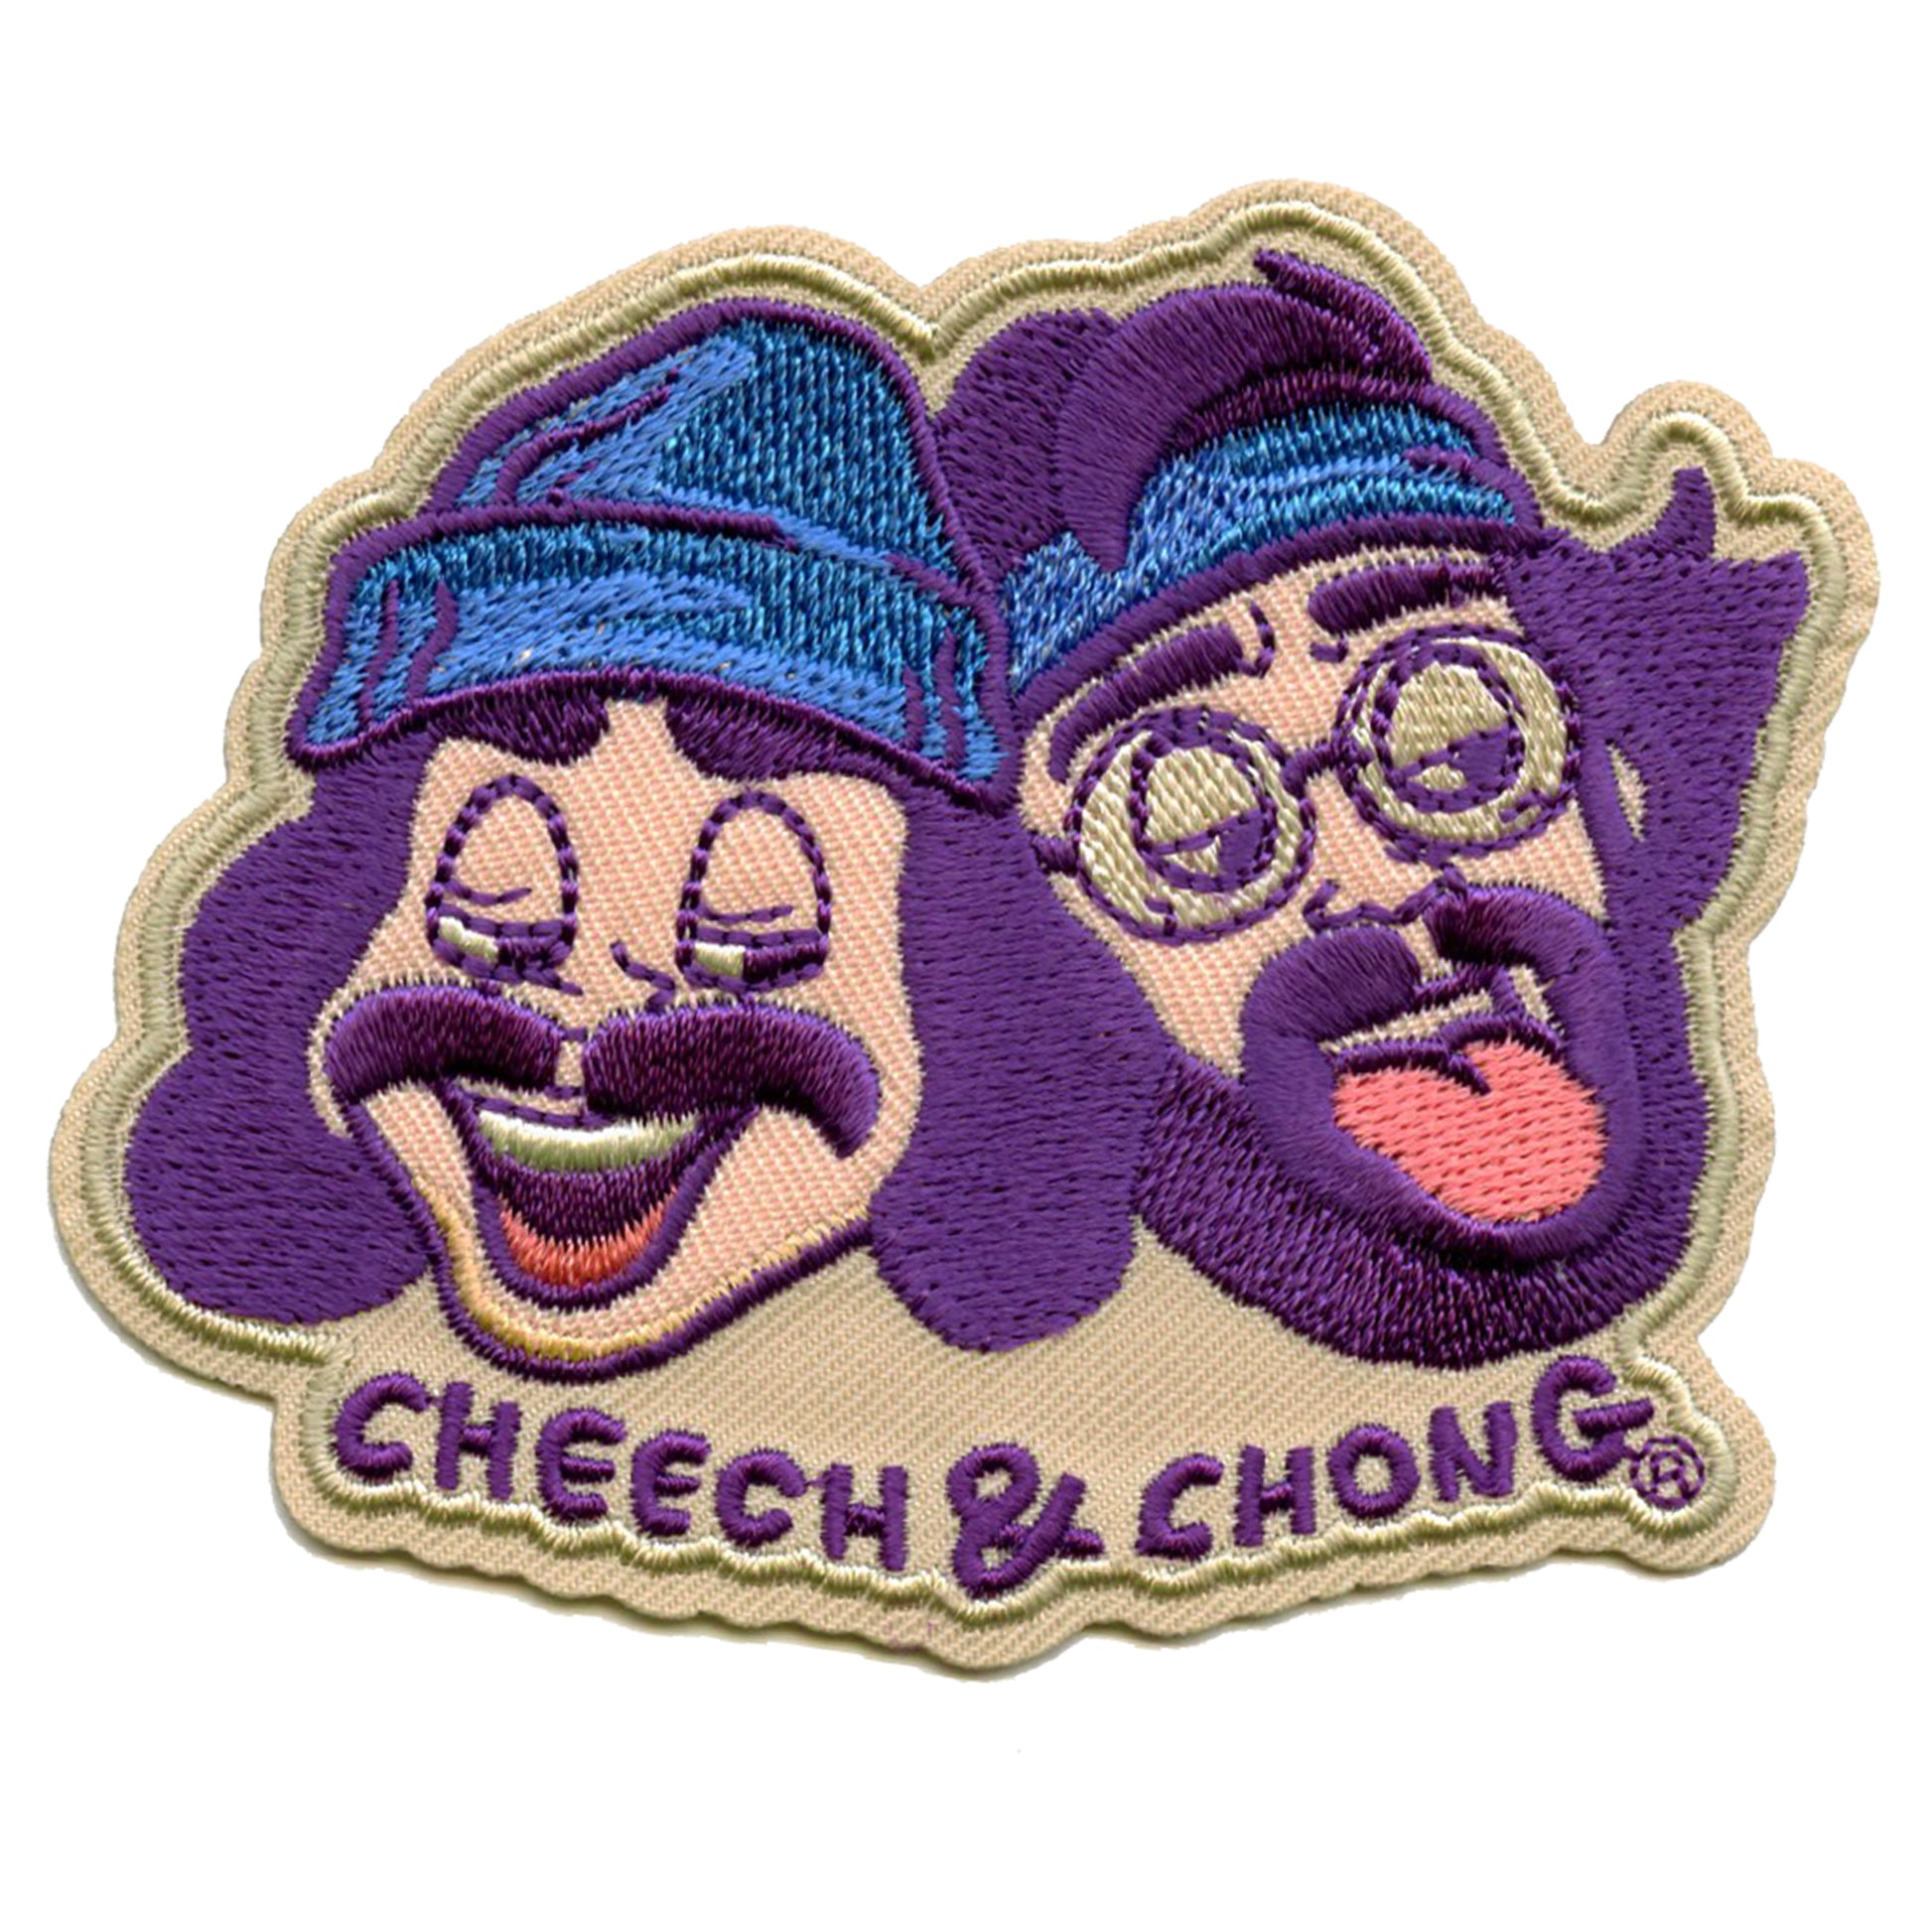 Cheech & Chong Head Shot Patch Hippy Stoner Comedians Embroidered Iron On